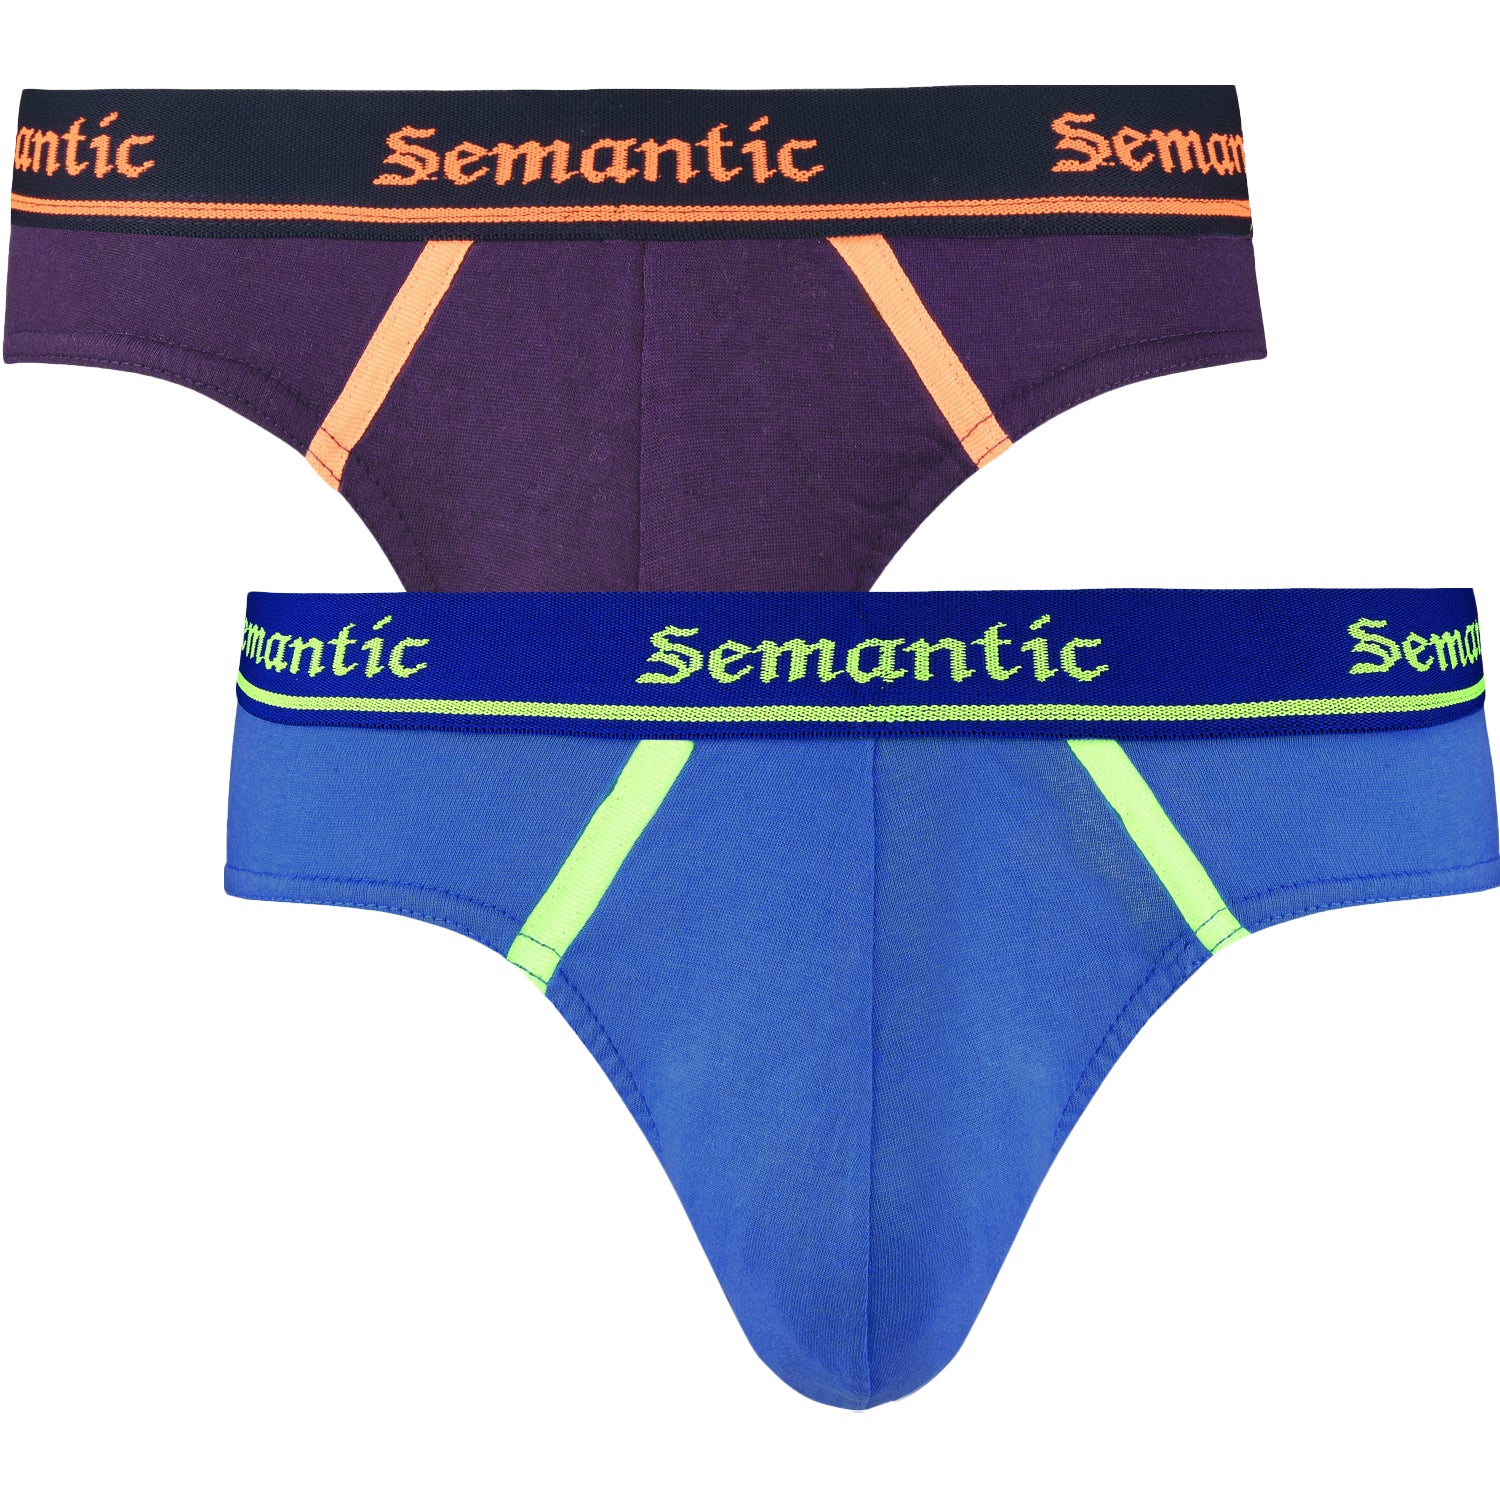 Semantic Cotton Briefs - Designer Waistband with Tape - Solid (Pack of 2)